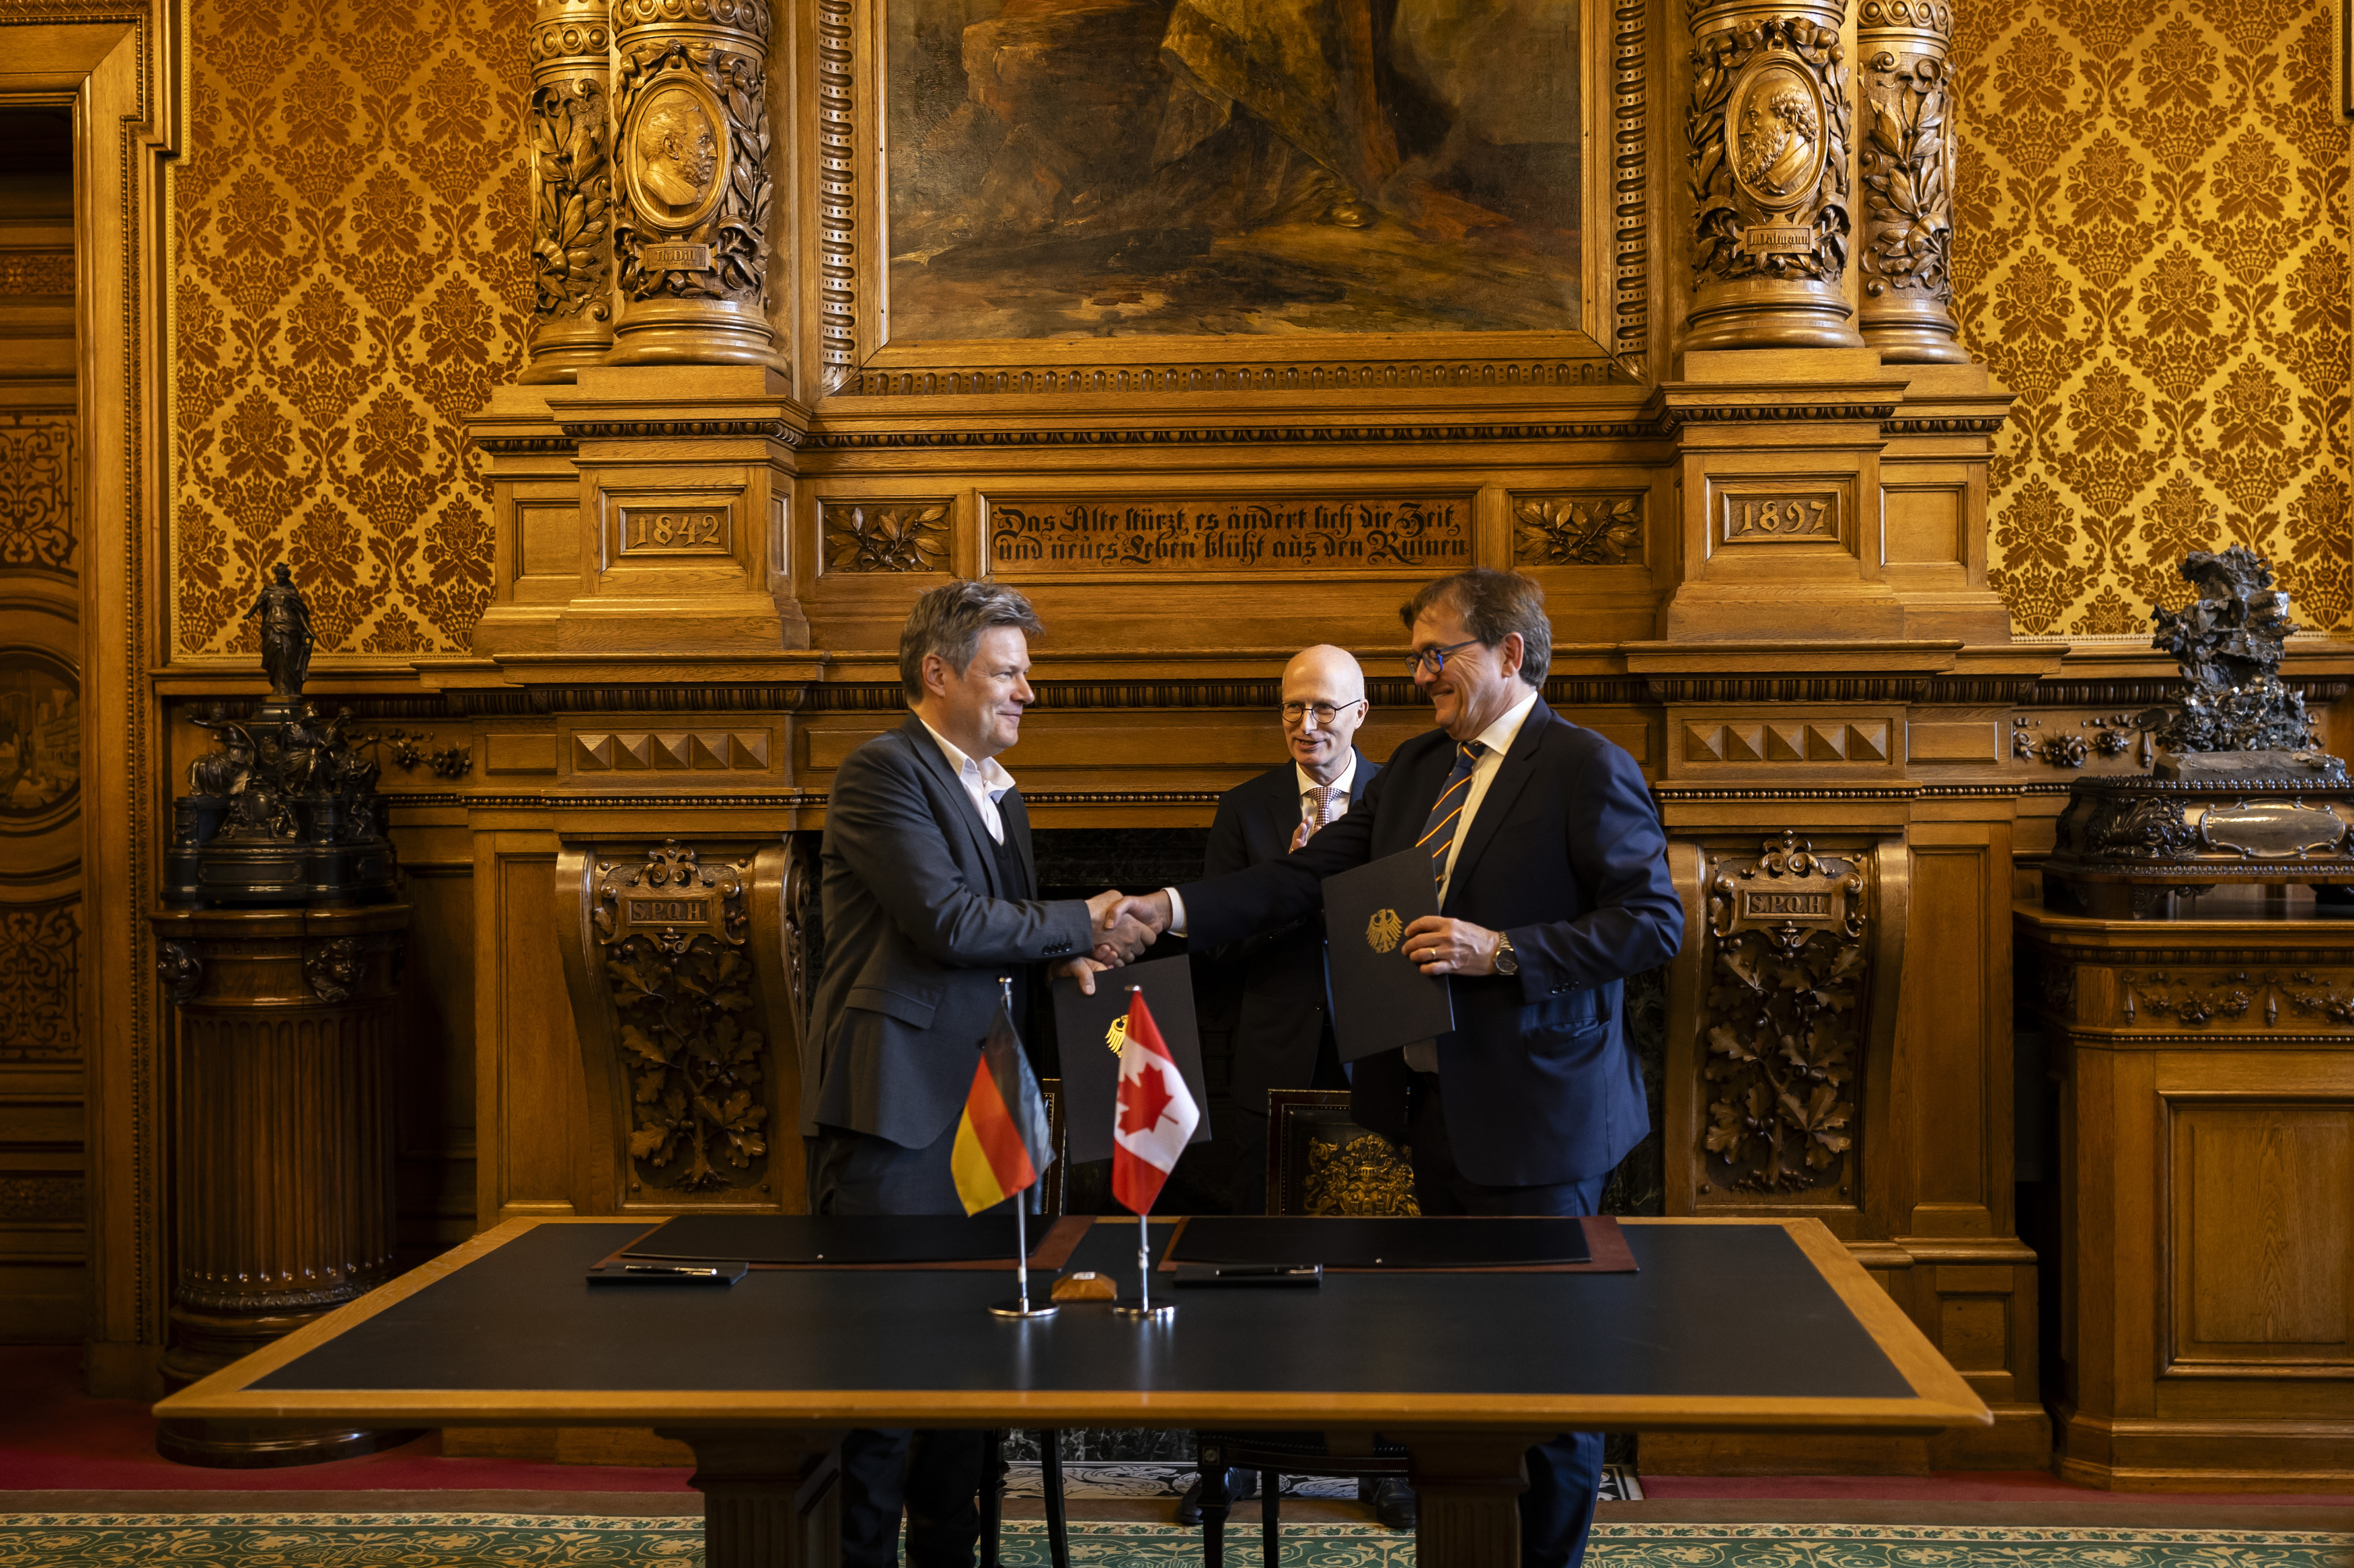 Ministers from Canada and Germany sign memorandum of understanding in Hamburg Chamber of Commerce